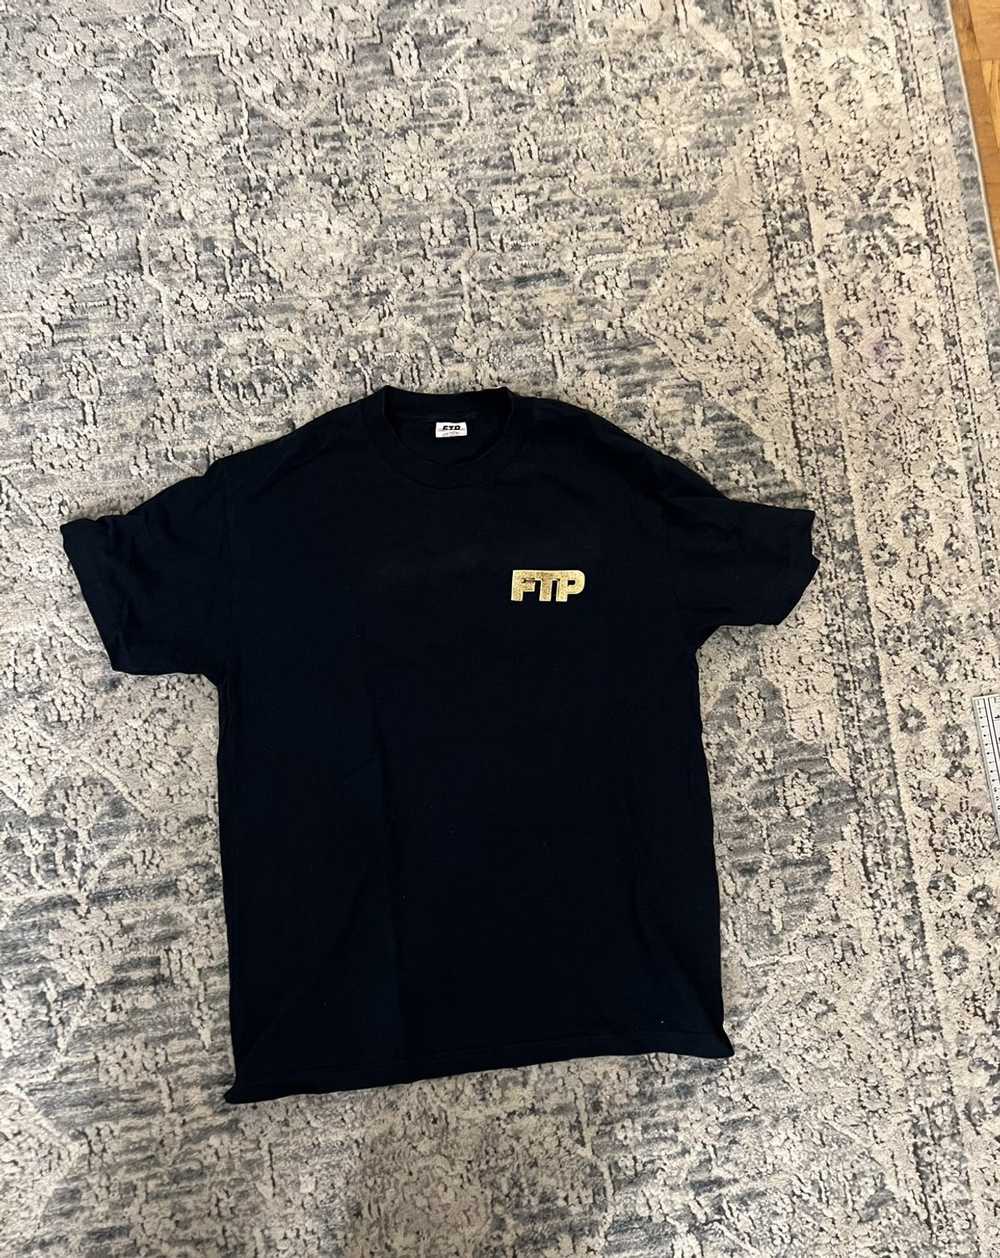 Fuck The Population Ftp bling tshirt - image 1